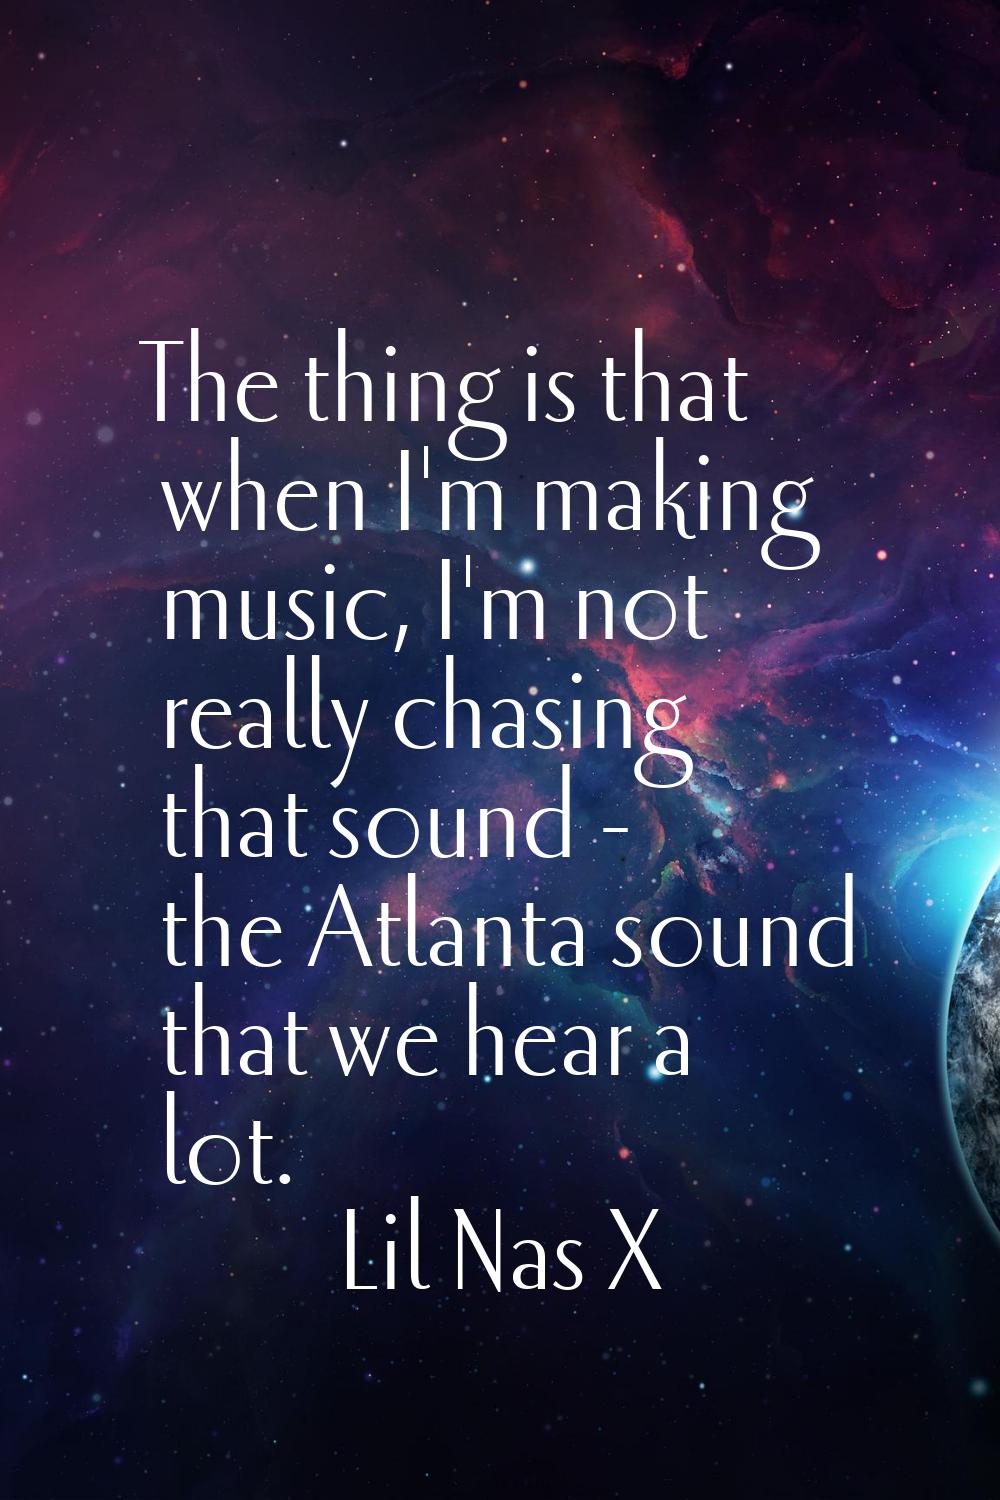 The thing is that when I'm making music, I'm not really chasing that sound - the Atlanta sound that